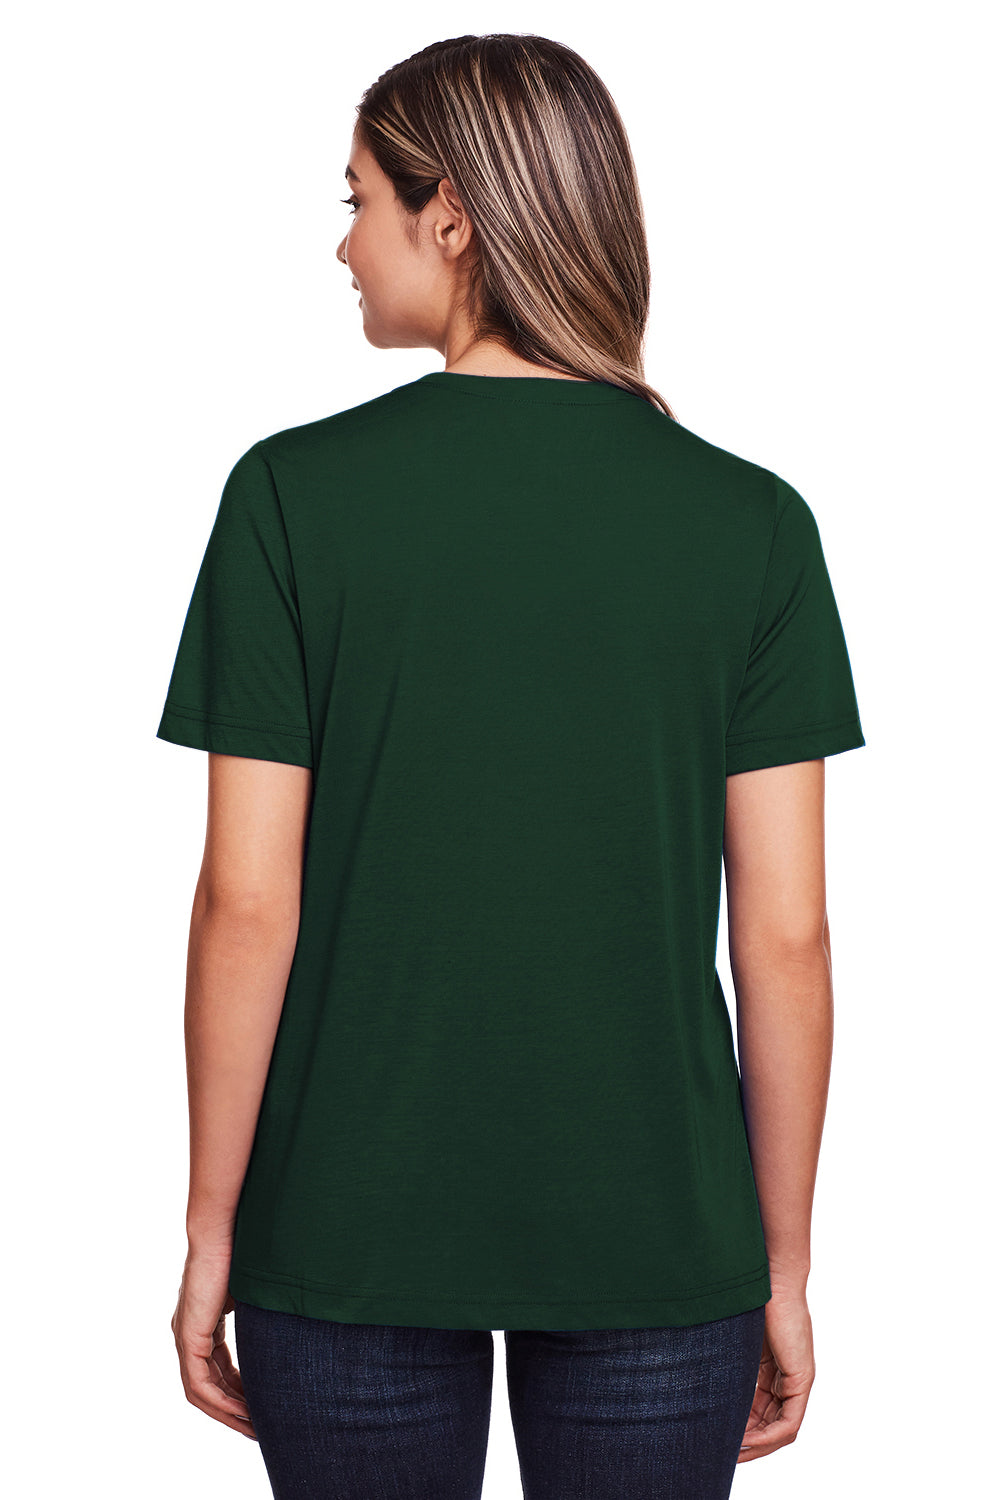 Core 365 CE111W Womens Fusion ChromaSoft Performance Moisture Wicking Short Sleeve Scoop Neck T-Shirt Forest Green Back